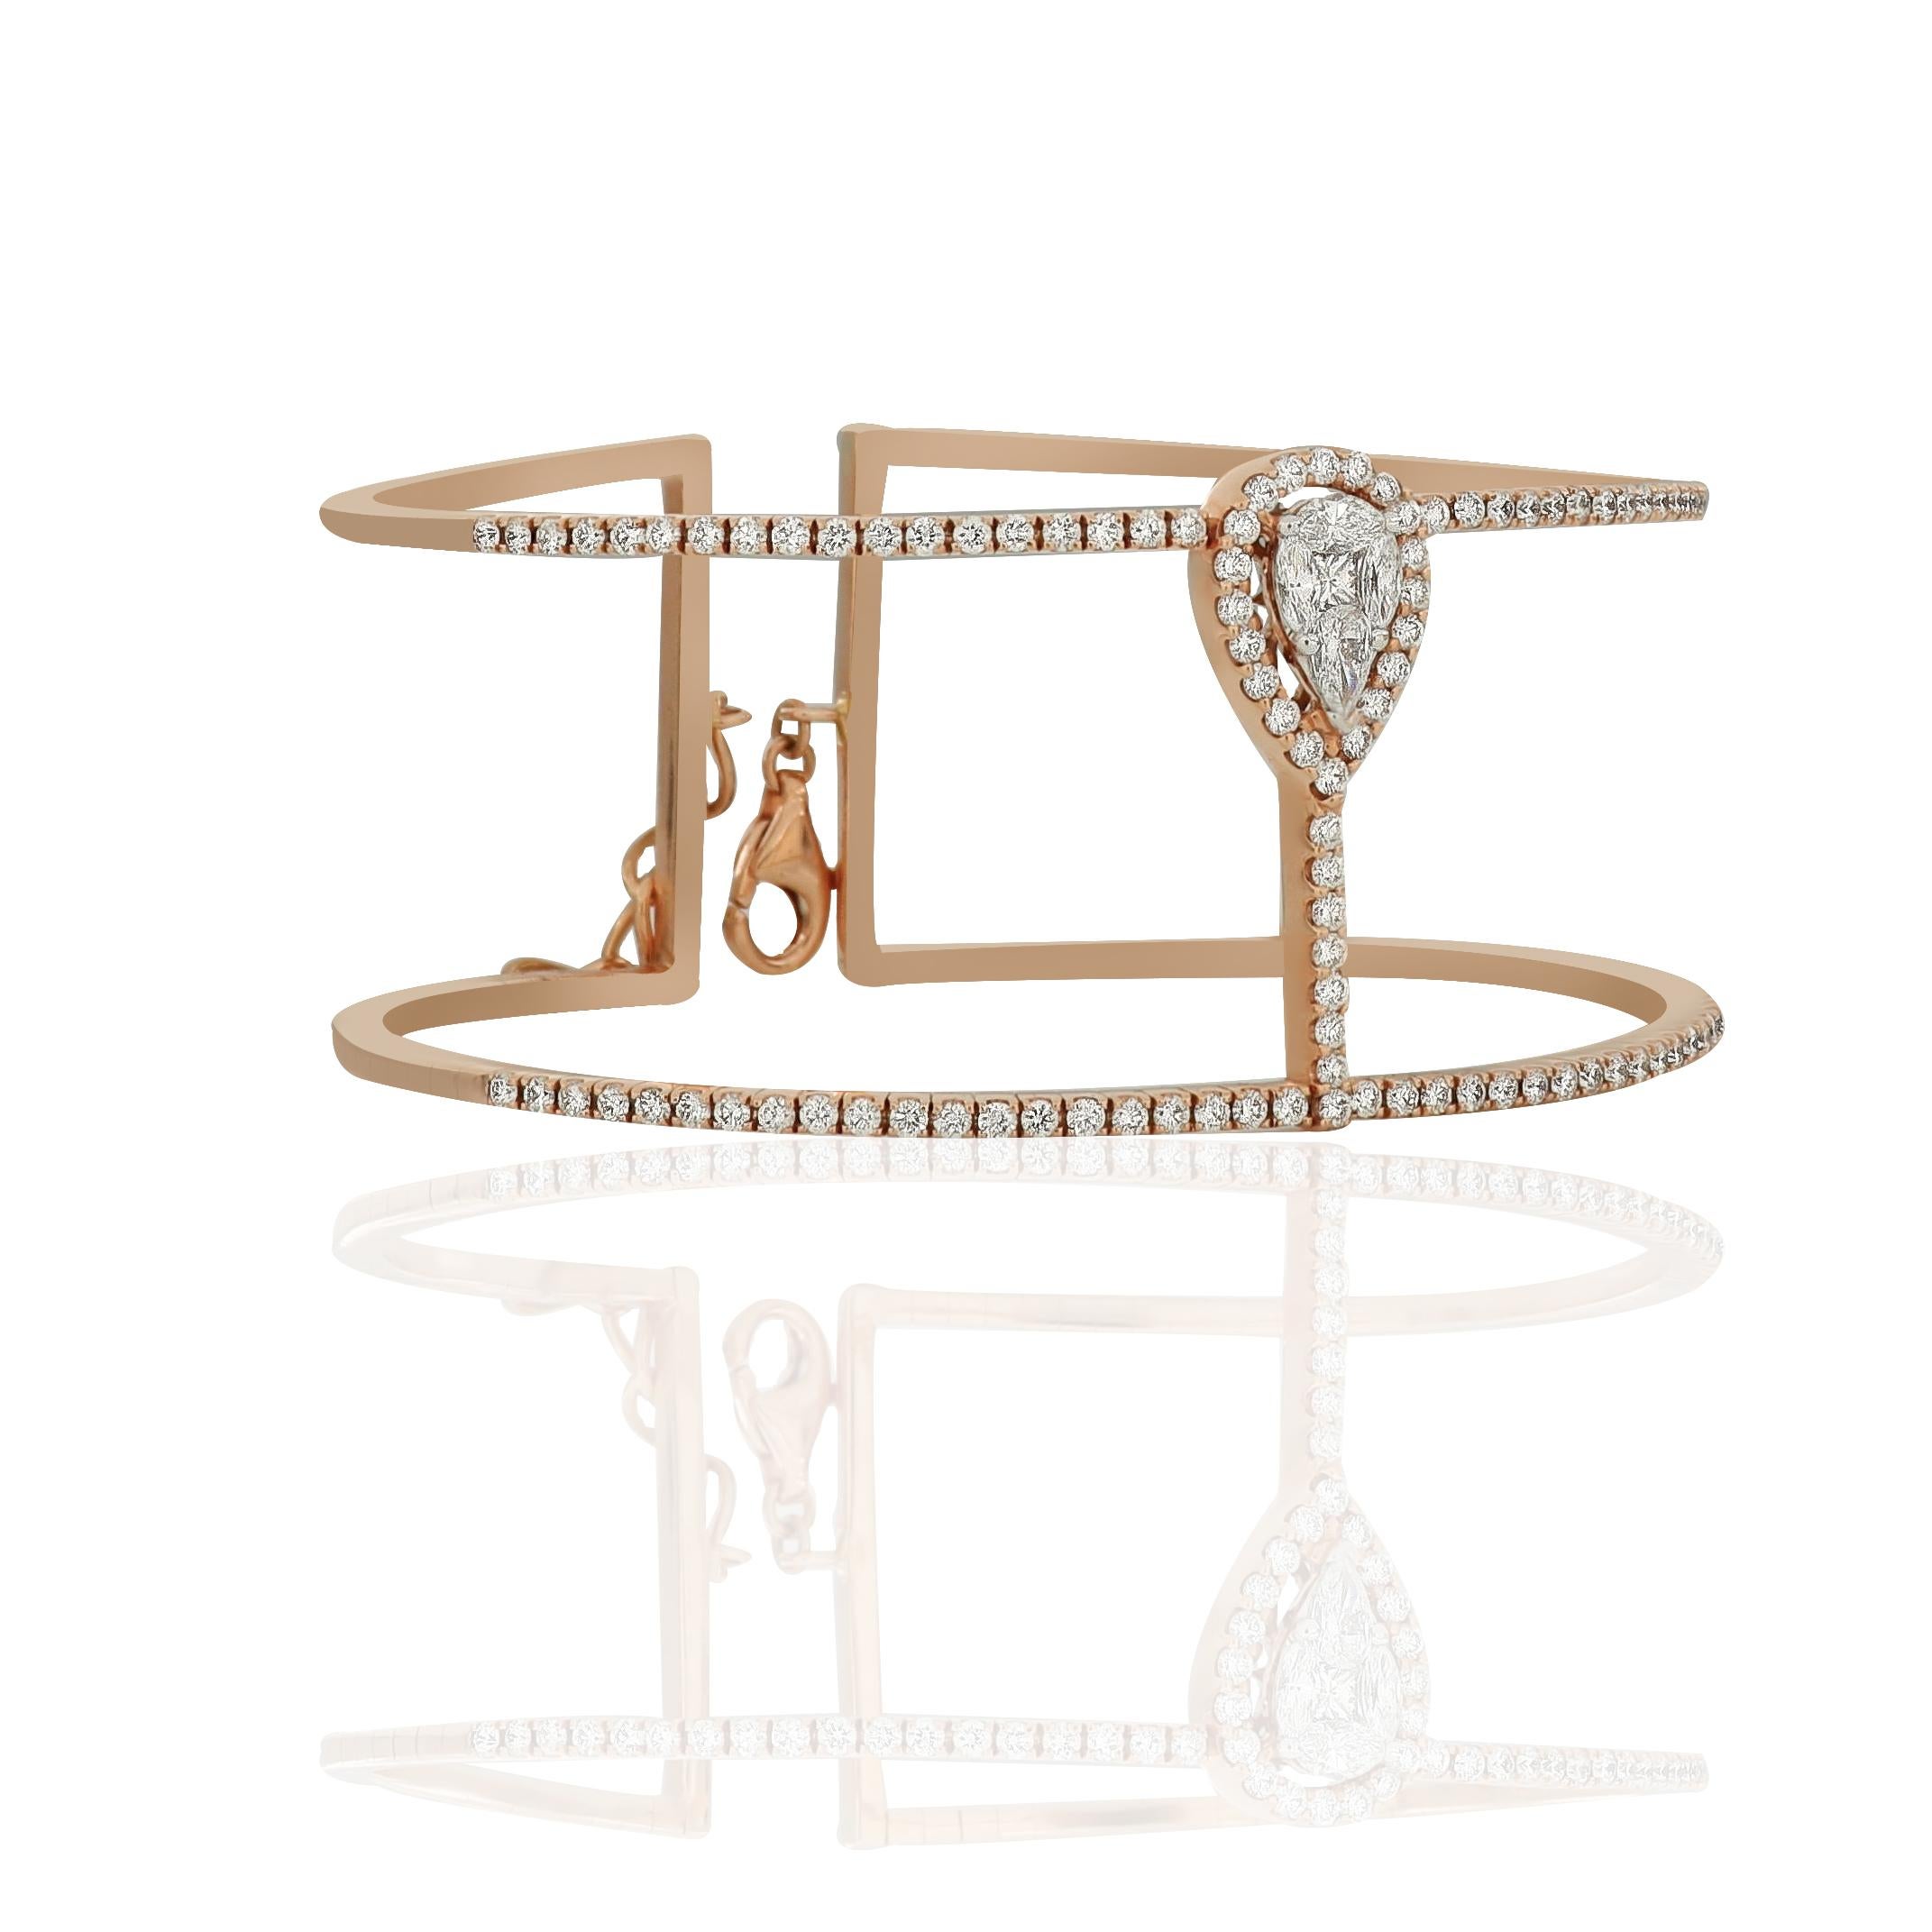 Amwaj high jewellery bangle in 18 karat rose gold is designed to embrace the wrist with exquisite brilliance. Round diamonds emphasize the design's dramatic layers. Grouped by a striking array of round, marquise, pear and princess cut diamonds that